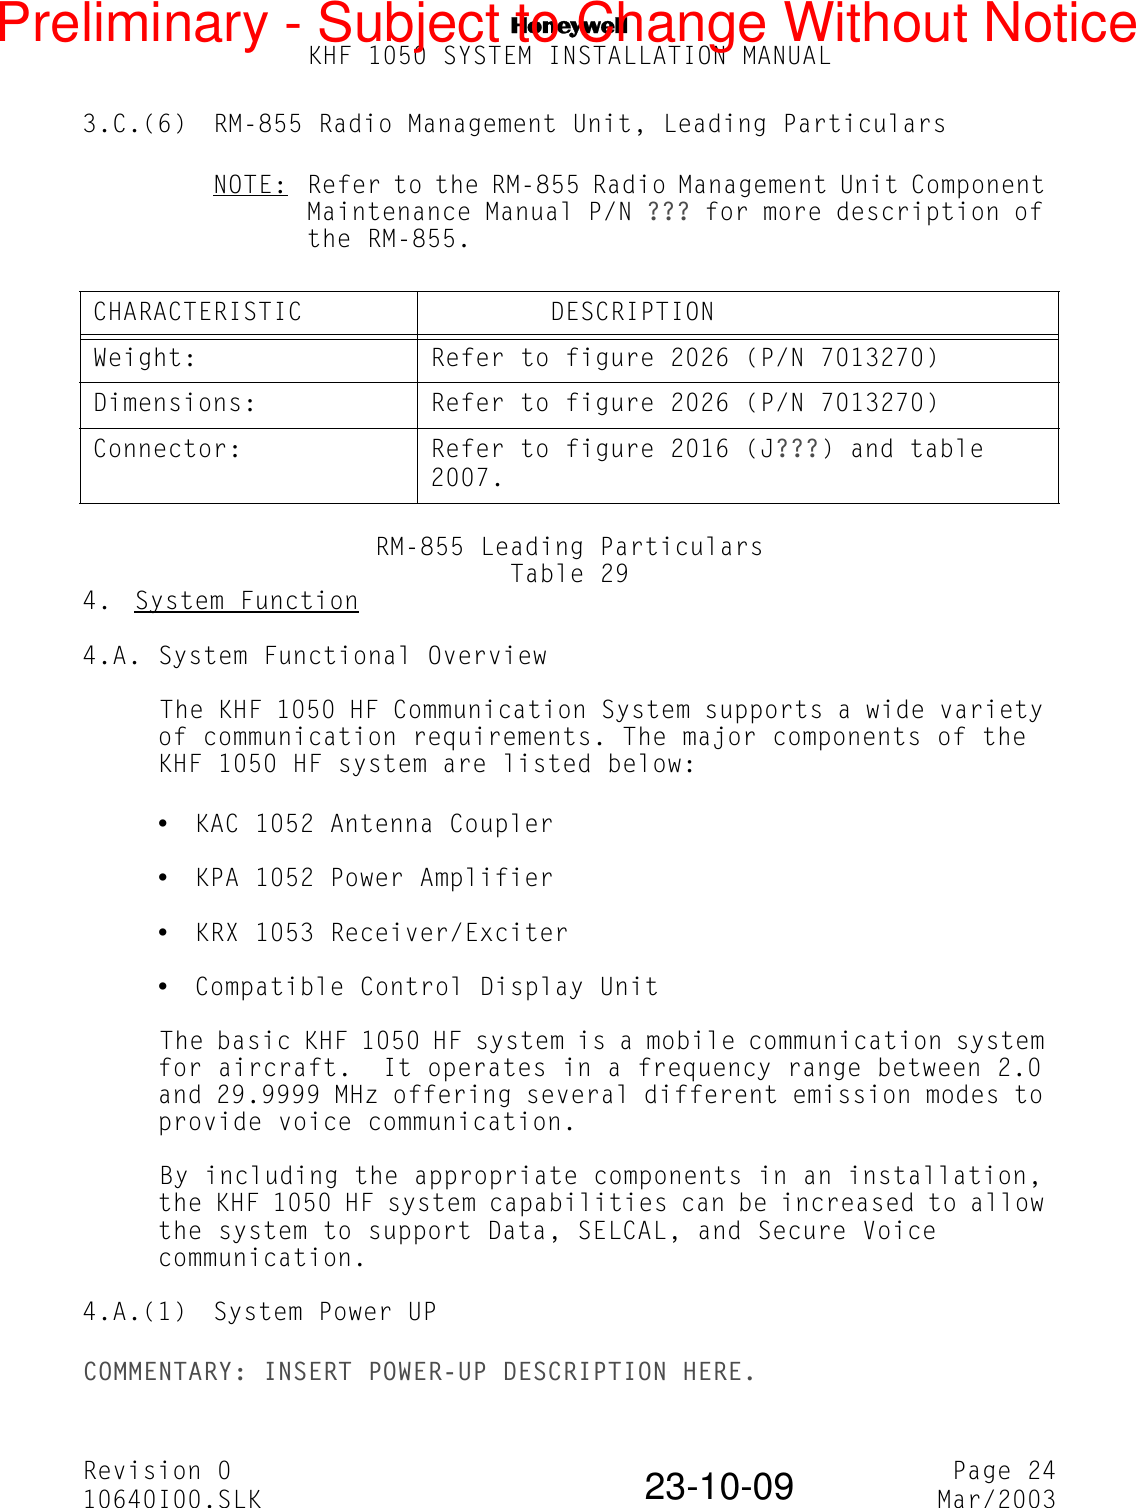 NKHF 1050 SYSTEM INSTALLATION MANUALRevision 0 Page 2410640I00.SLK Mar/200323-10-093.C.(6) RM-855 Radio Management Unit, Leading ParticularsNOTE: Refer to the RM-855 Radio Management Unit Component Maintenance Manual P/N ??? for more description of the RM-855.RM-855 Leading ParticularsTable 294.  System Function4.A. System Functional OverviewThe KHF 1050 HF Communication System supports a wide variety of communication requirements. The major components of the KHF 1050 HF system are listed below:yKAC 1052 Antenna CoupleryKPA 1052 Power AmplifieryKRX 1053 Receiver/ExciteryCompatible Control Display UnitThe basic KHF 1050 HF system is a mobile communication system for aircraft.  It operates in a frequency range between 2.0 and 29.9999 MHz offering several different emission modes to provide voice communication.By including the appropriate components in an installation, the KHF 1050 HF system capabilities can be increased to allow the system to support Data, SELCAL, and Secure Voice communication.4.A.(1) System Power UPCOMMENTARY: INSERT POWER-UP DESCRIPTION HERE.CHARACTERISTIC         DESCRIPTIONWeight: Refer to figure 2026 (P/N 7013270)Dimensions: Refer to figure 2026 (P/N 7013270)Connector: Refer to figure 2016 (J???) and table 2007.Preliminary - Subject to Change Without Notice